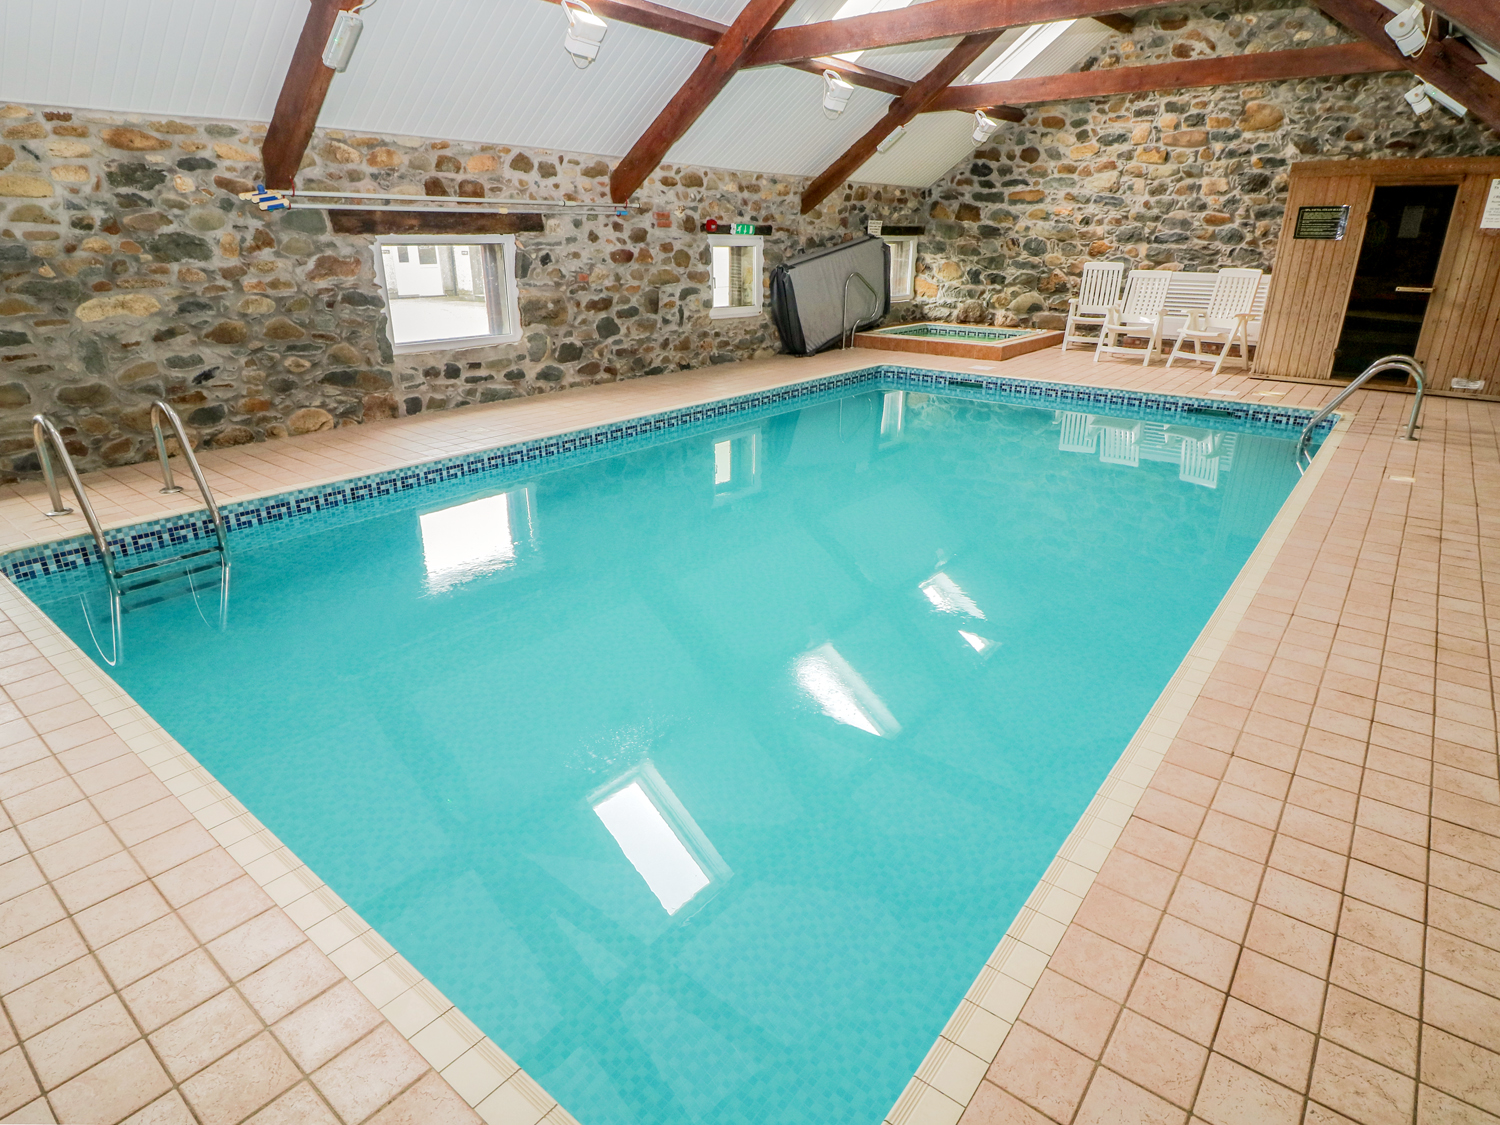 Sykes Cottages -  swimming pool